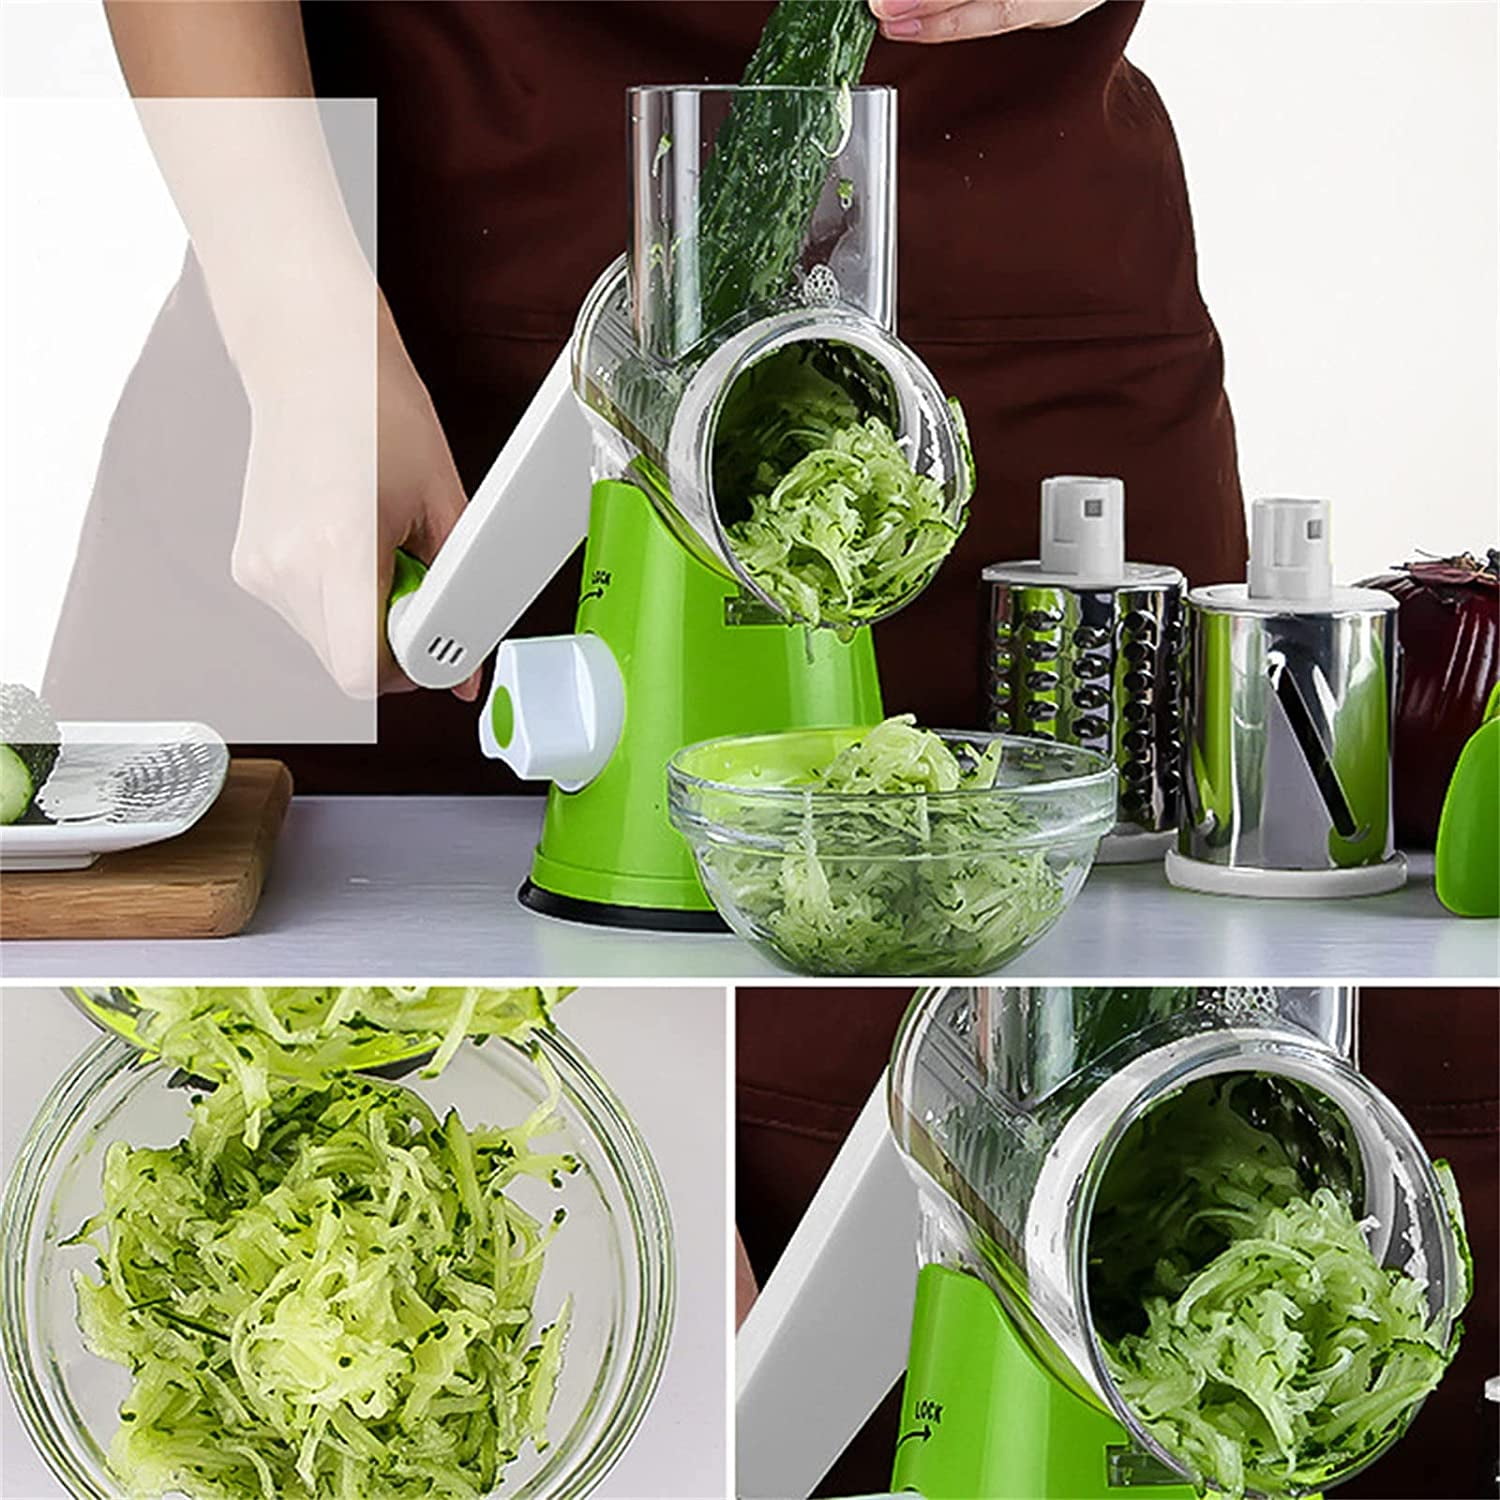 🎁New Year Hot Sale-30% OFF🍓Multifunctional Vegetable Cutter – Culticate